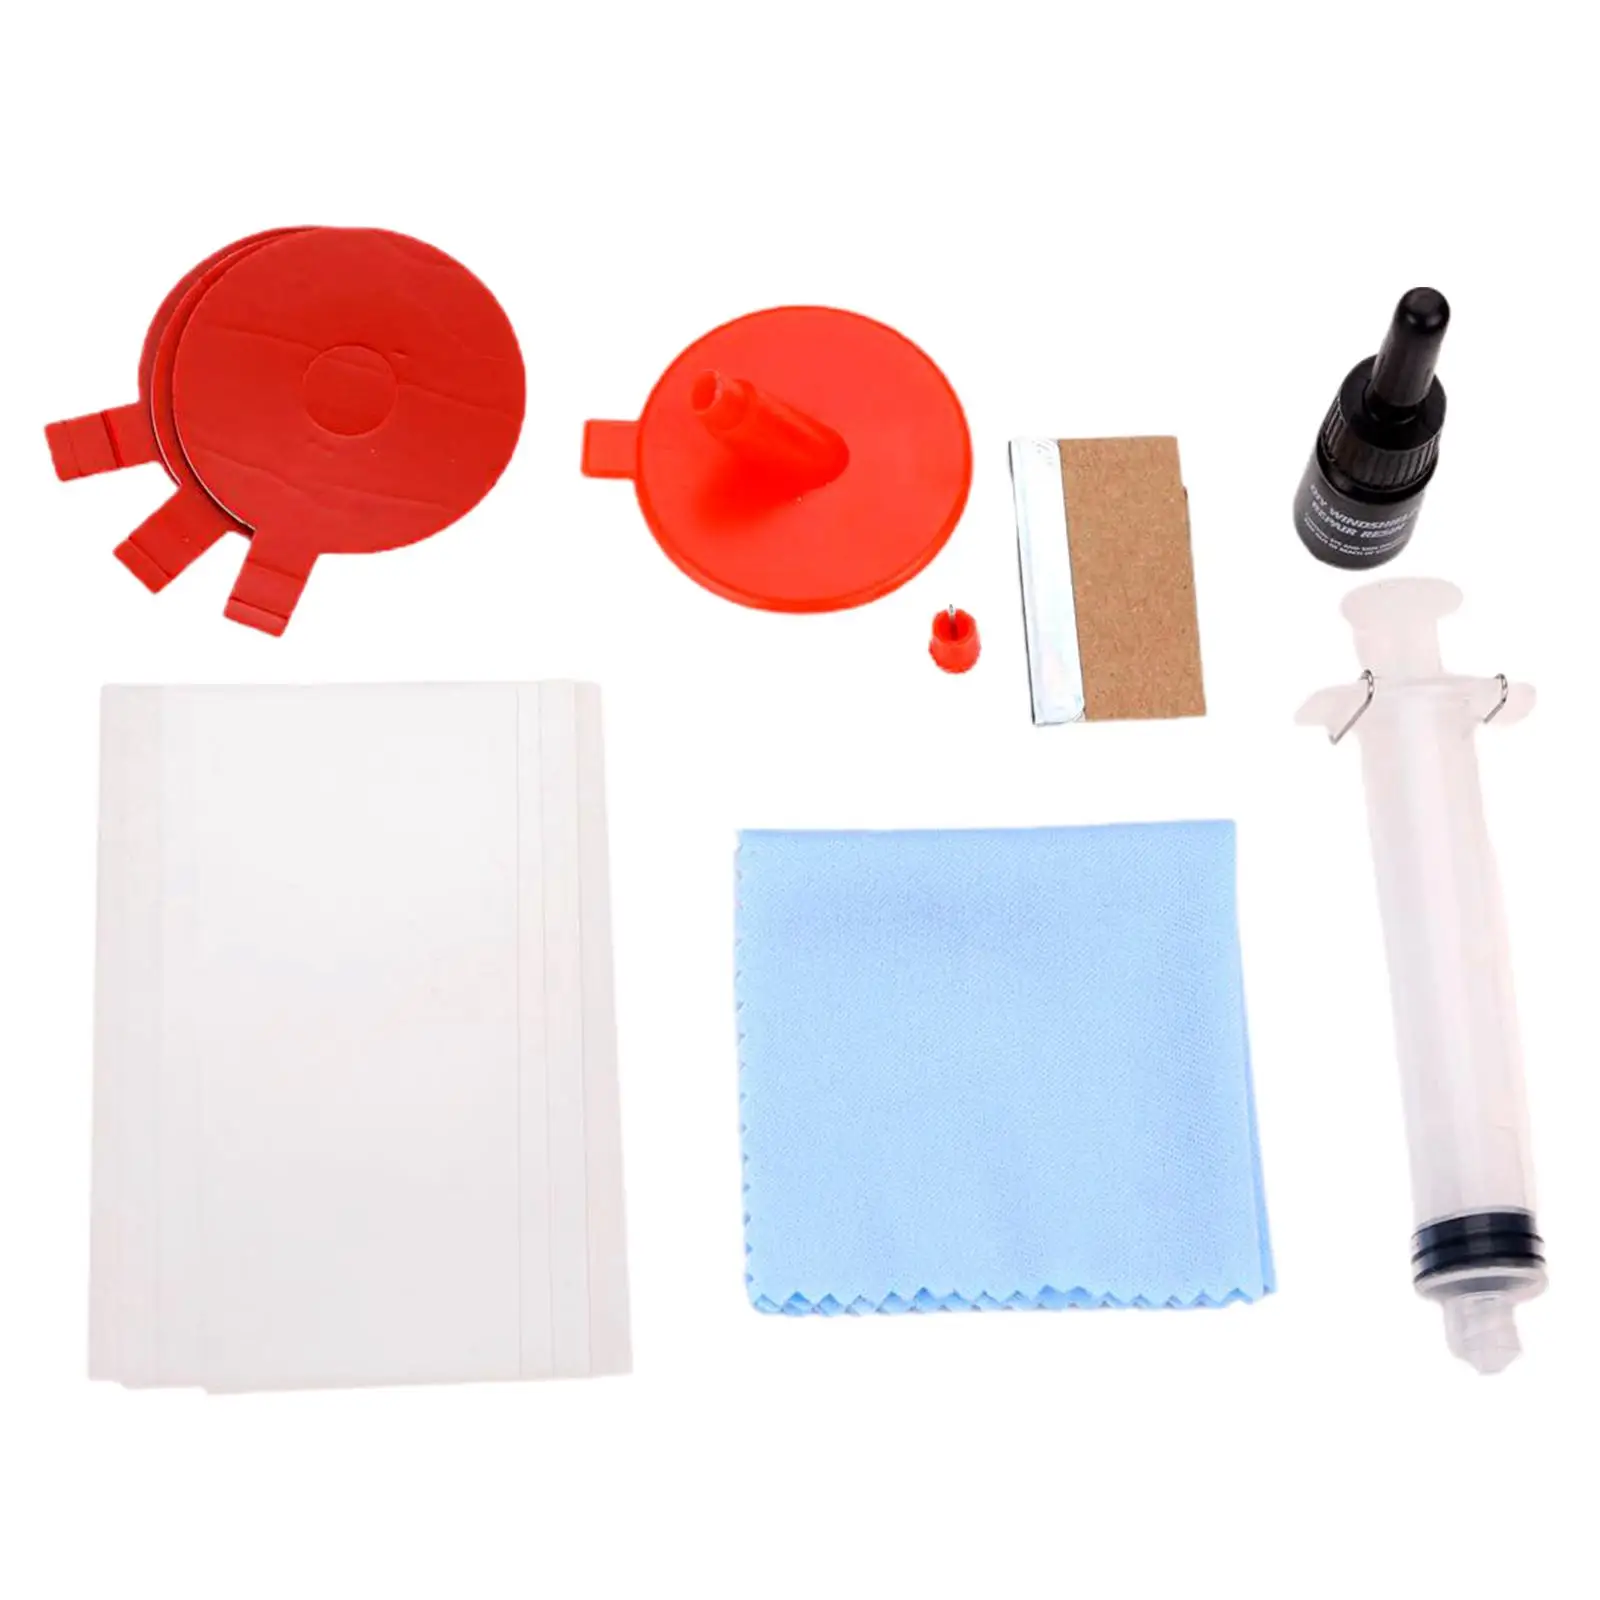 

Automotive Windshield Repair Kit Filler Tools Remover Kit for Cobwebs